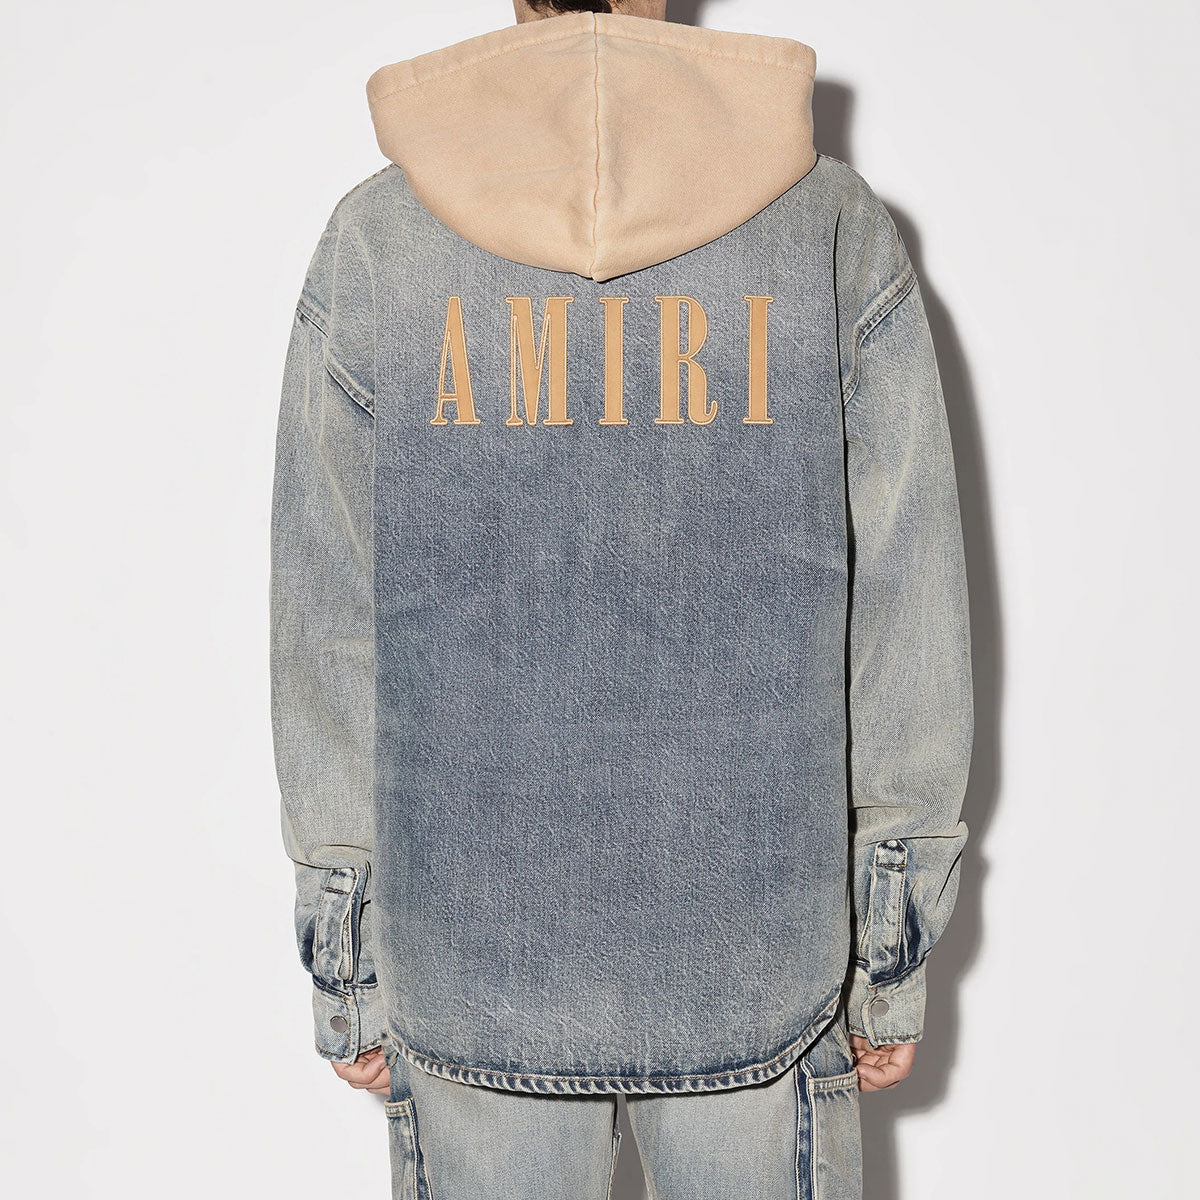 DENIM HOODED OVERSHIRT - Why are you here?